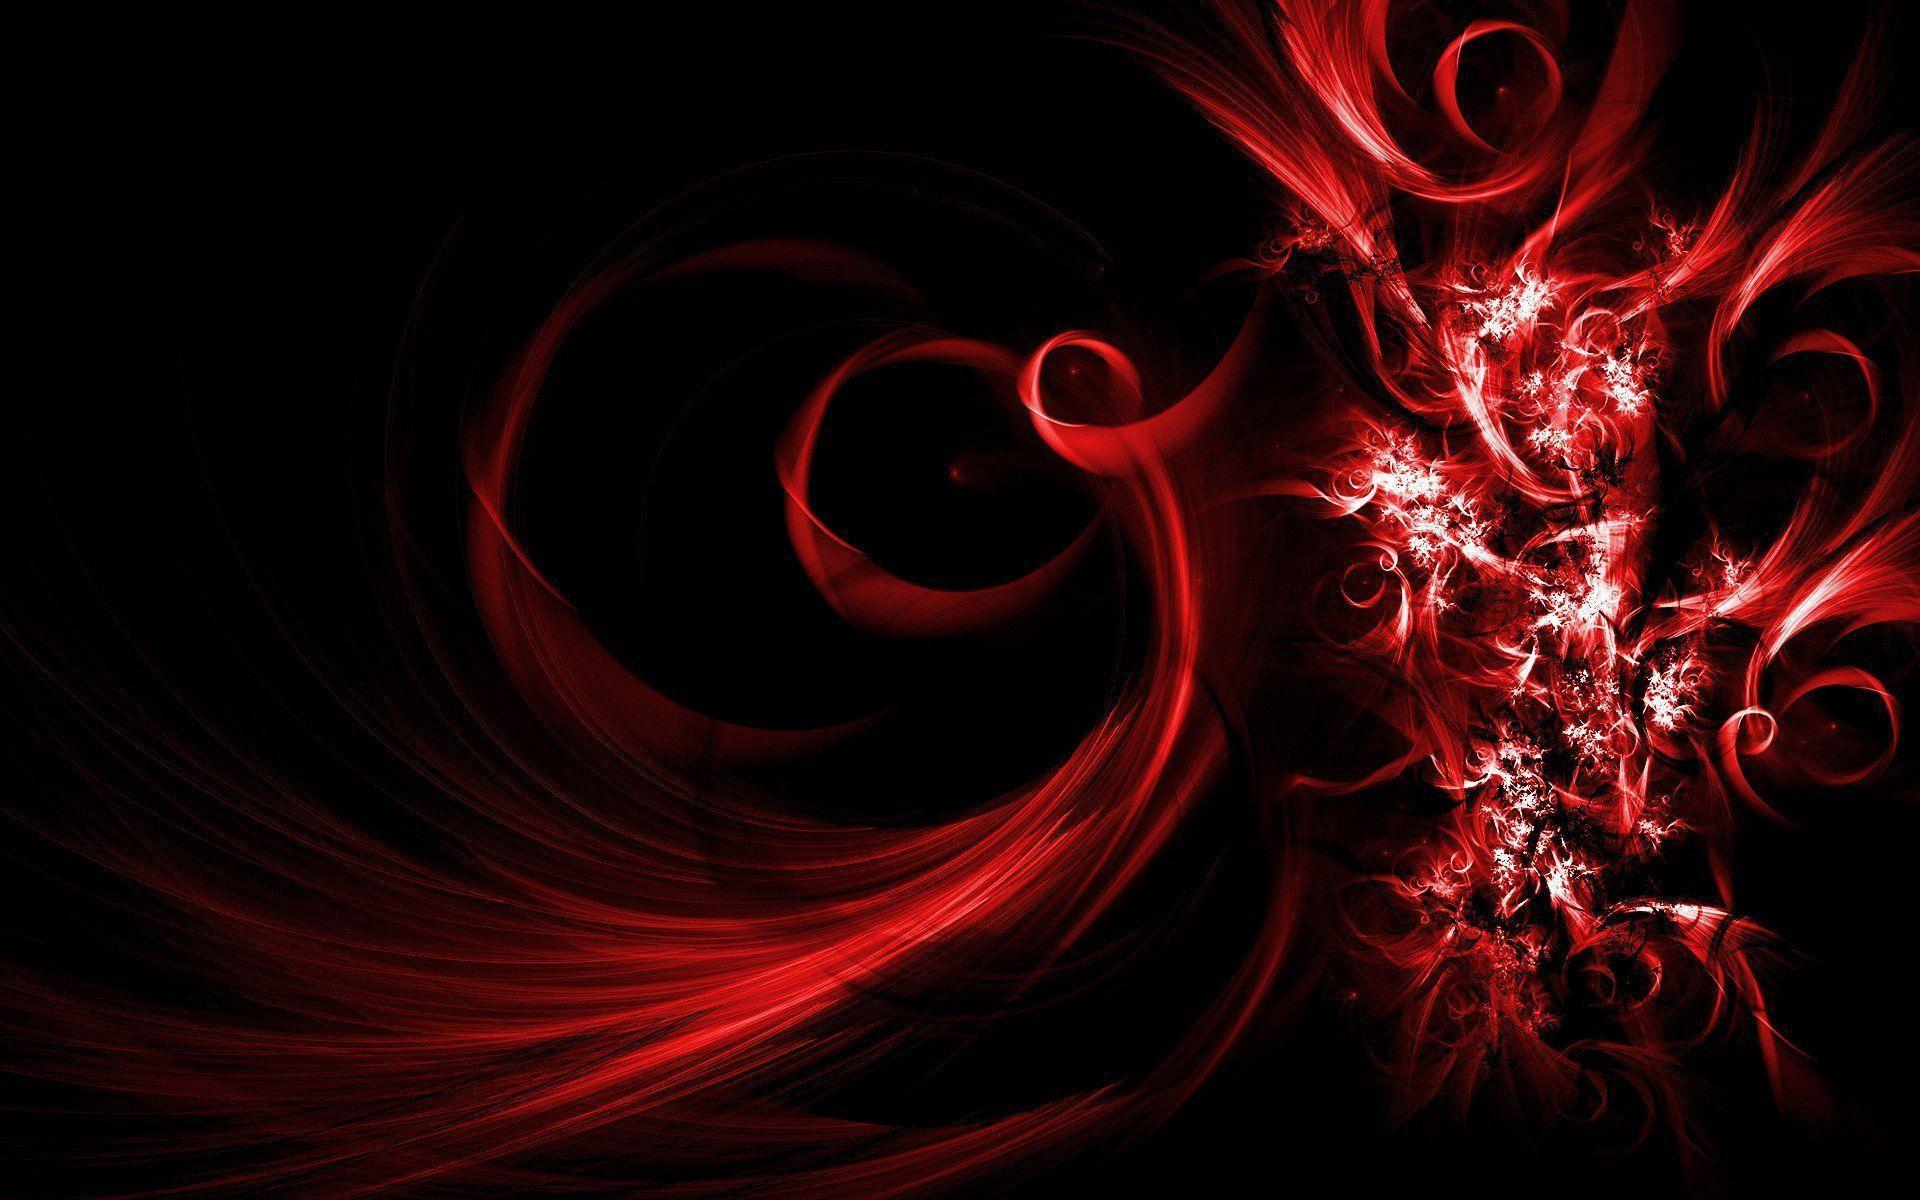 Red And Black Abstract Wallpapers - Wallpaper Cave